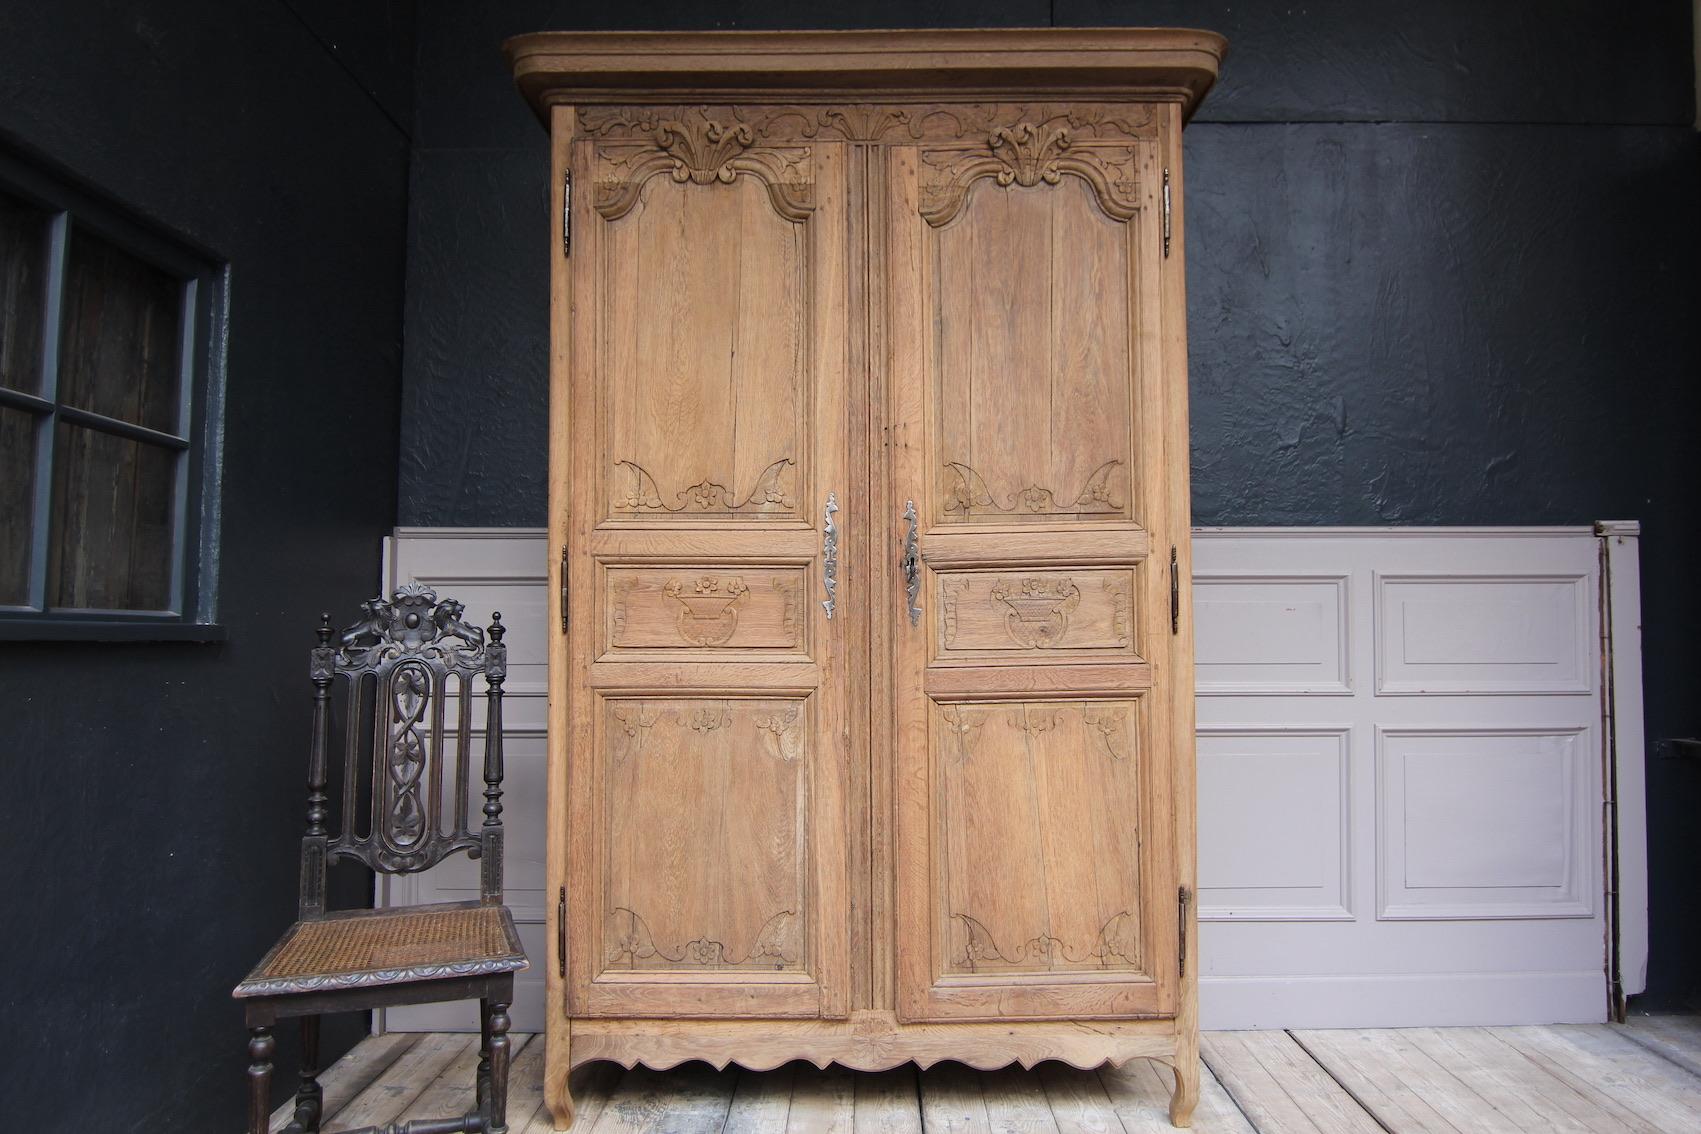 French Provincial armoire or wedding cabinet from the early 19th century. Stripped of the old wax, revealing the beautiful surface of the raw partially carved oak wood.

A two-door side coffered body with applied moulded cornice. The doors are